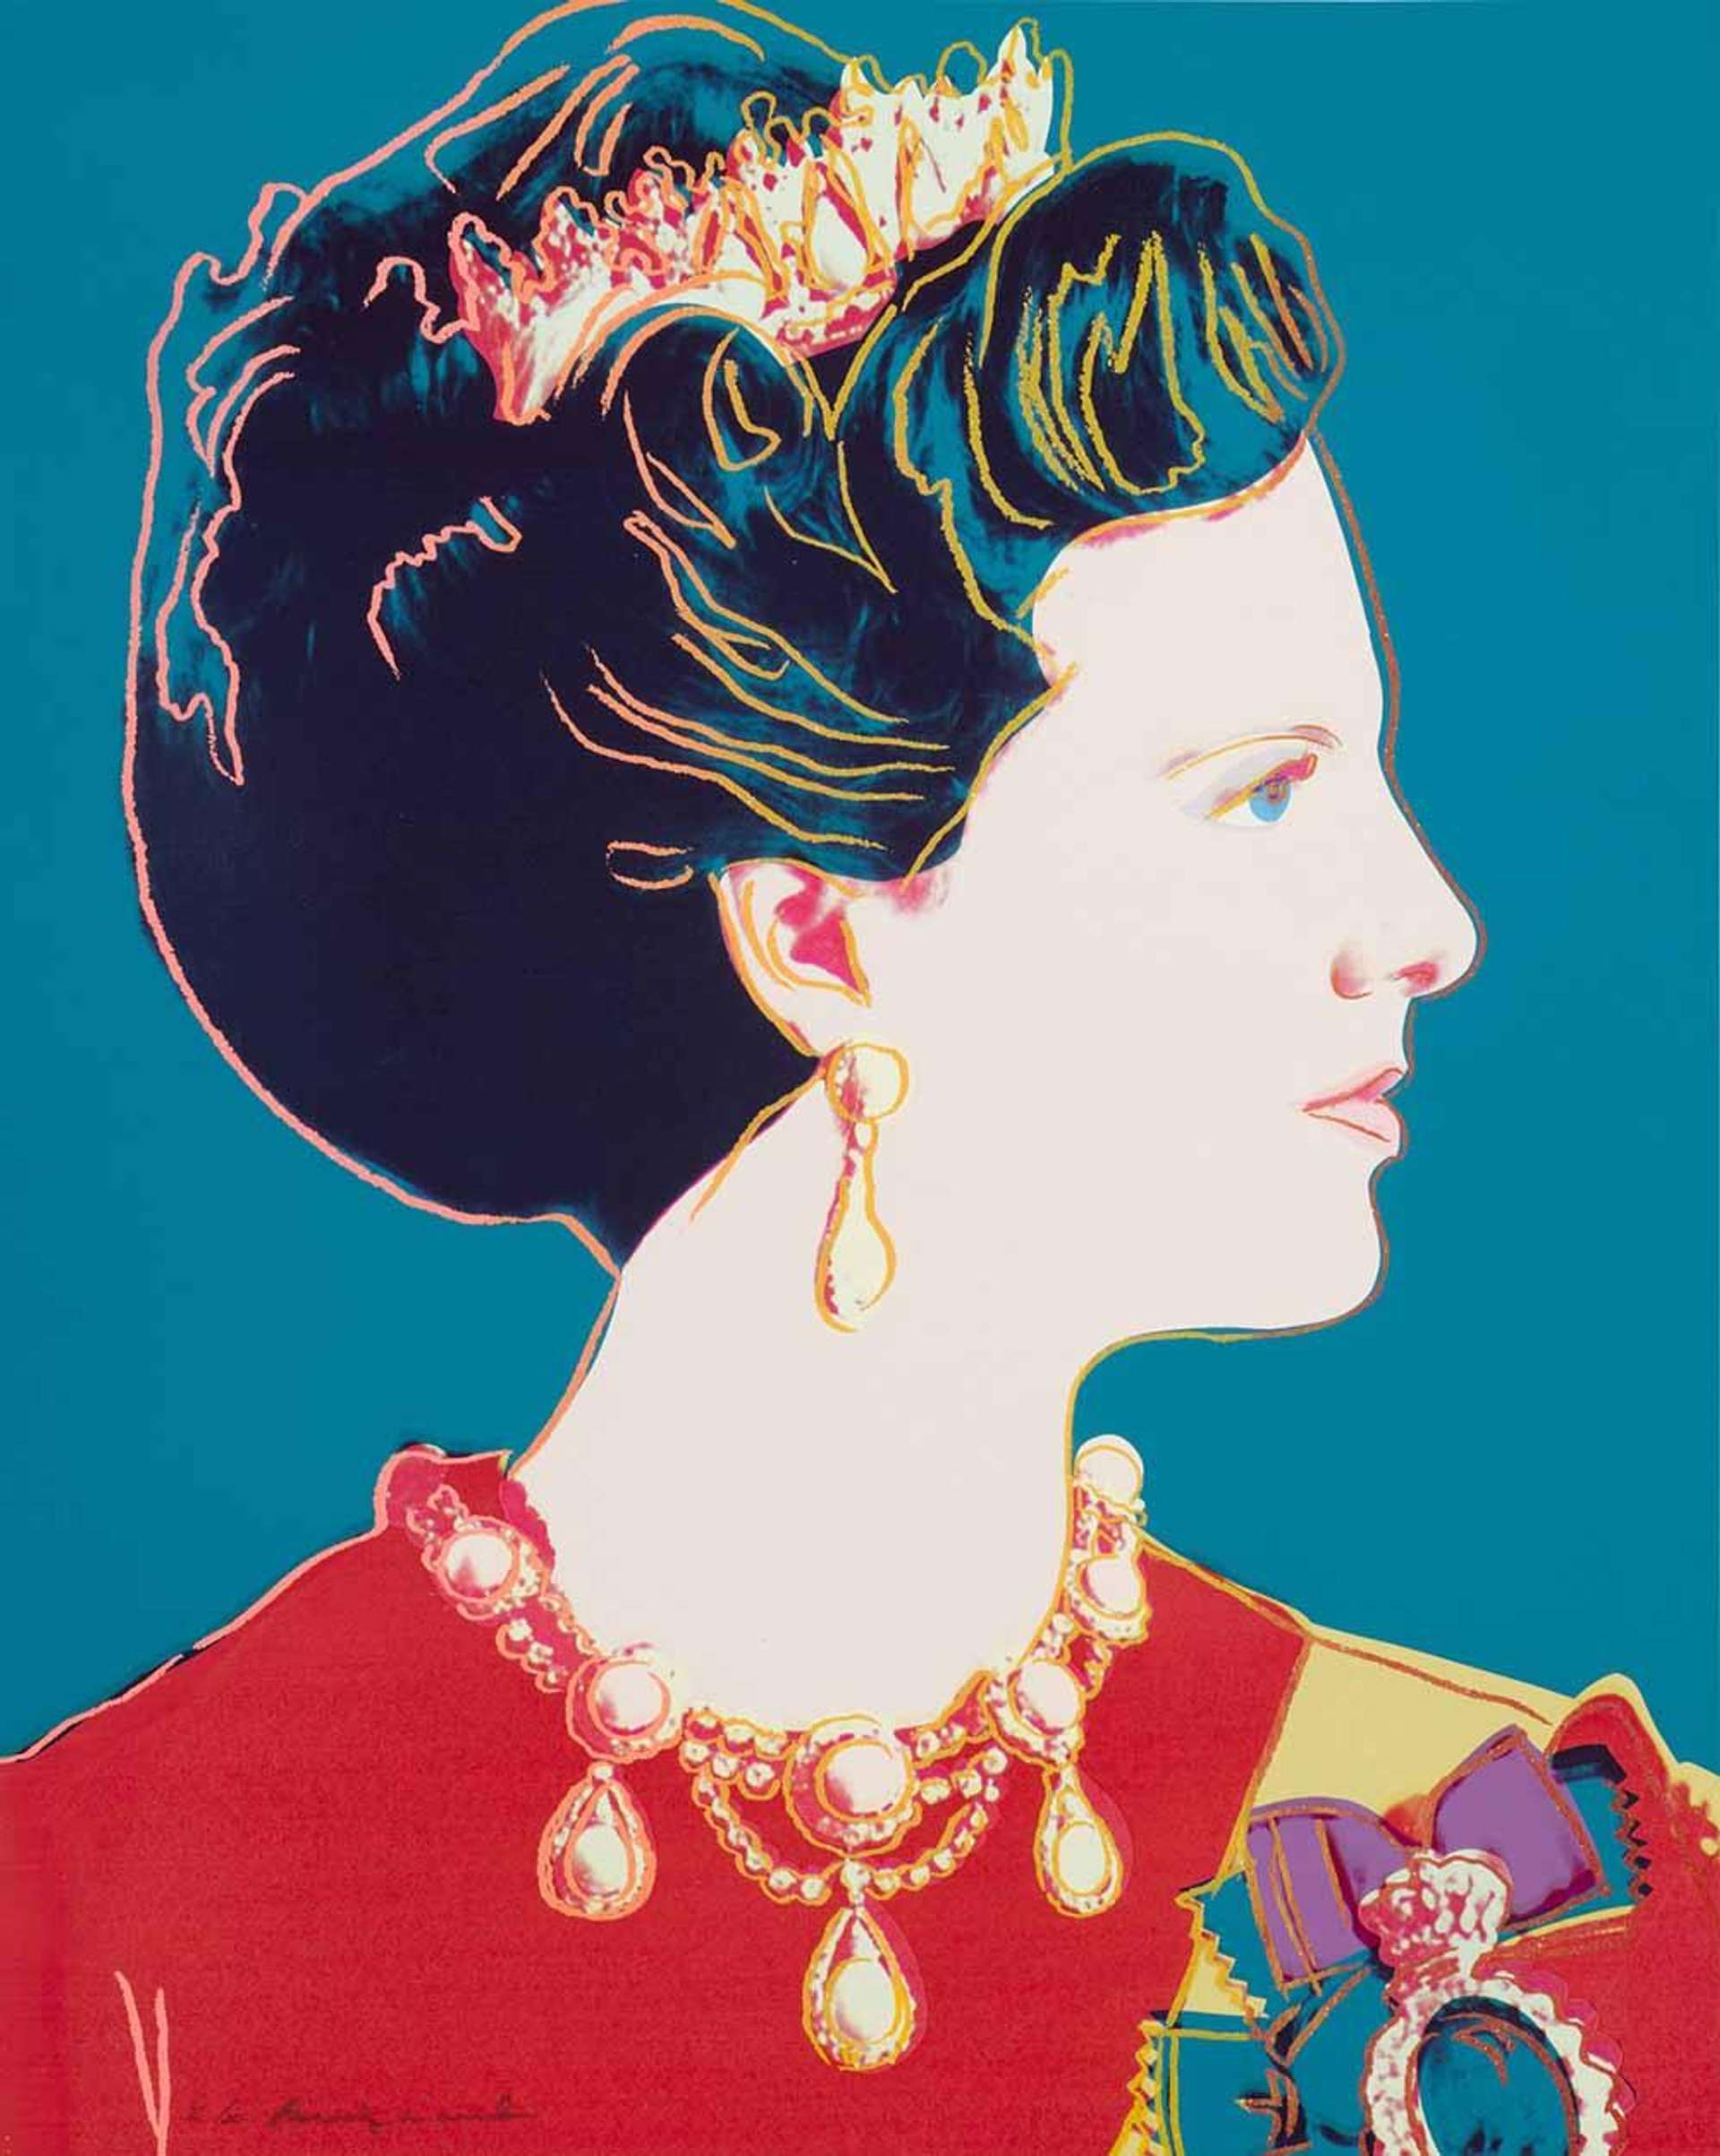 Queen Margrethe Of Denmark Royal Edition (F. & S. II.343A) - Signed Print by Andy Warhol 1987 - MyArtBroker